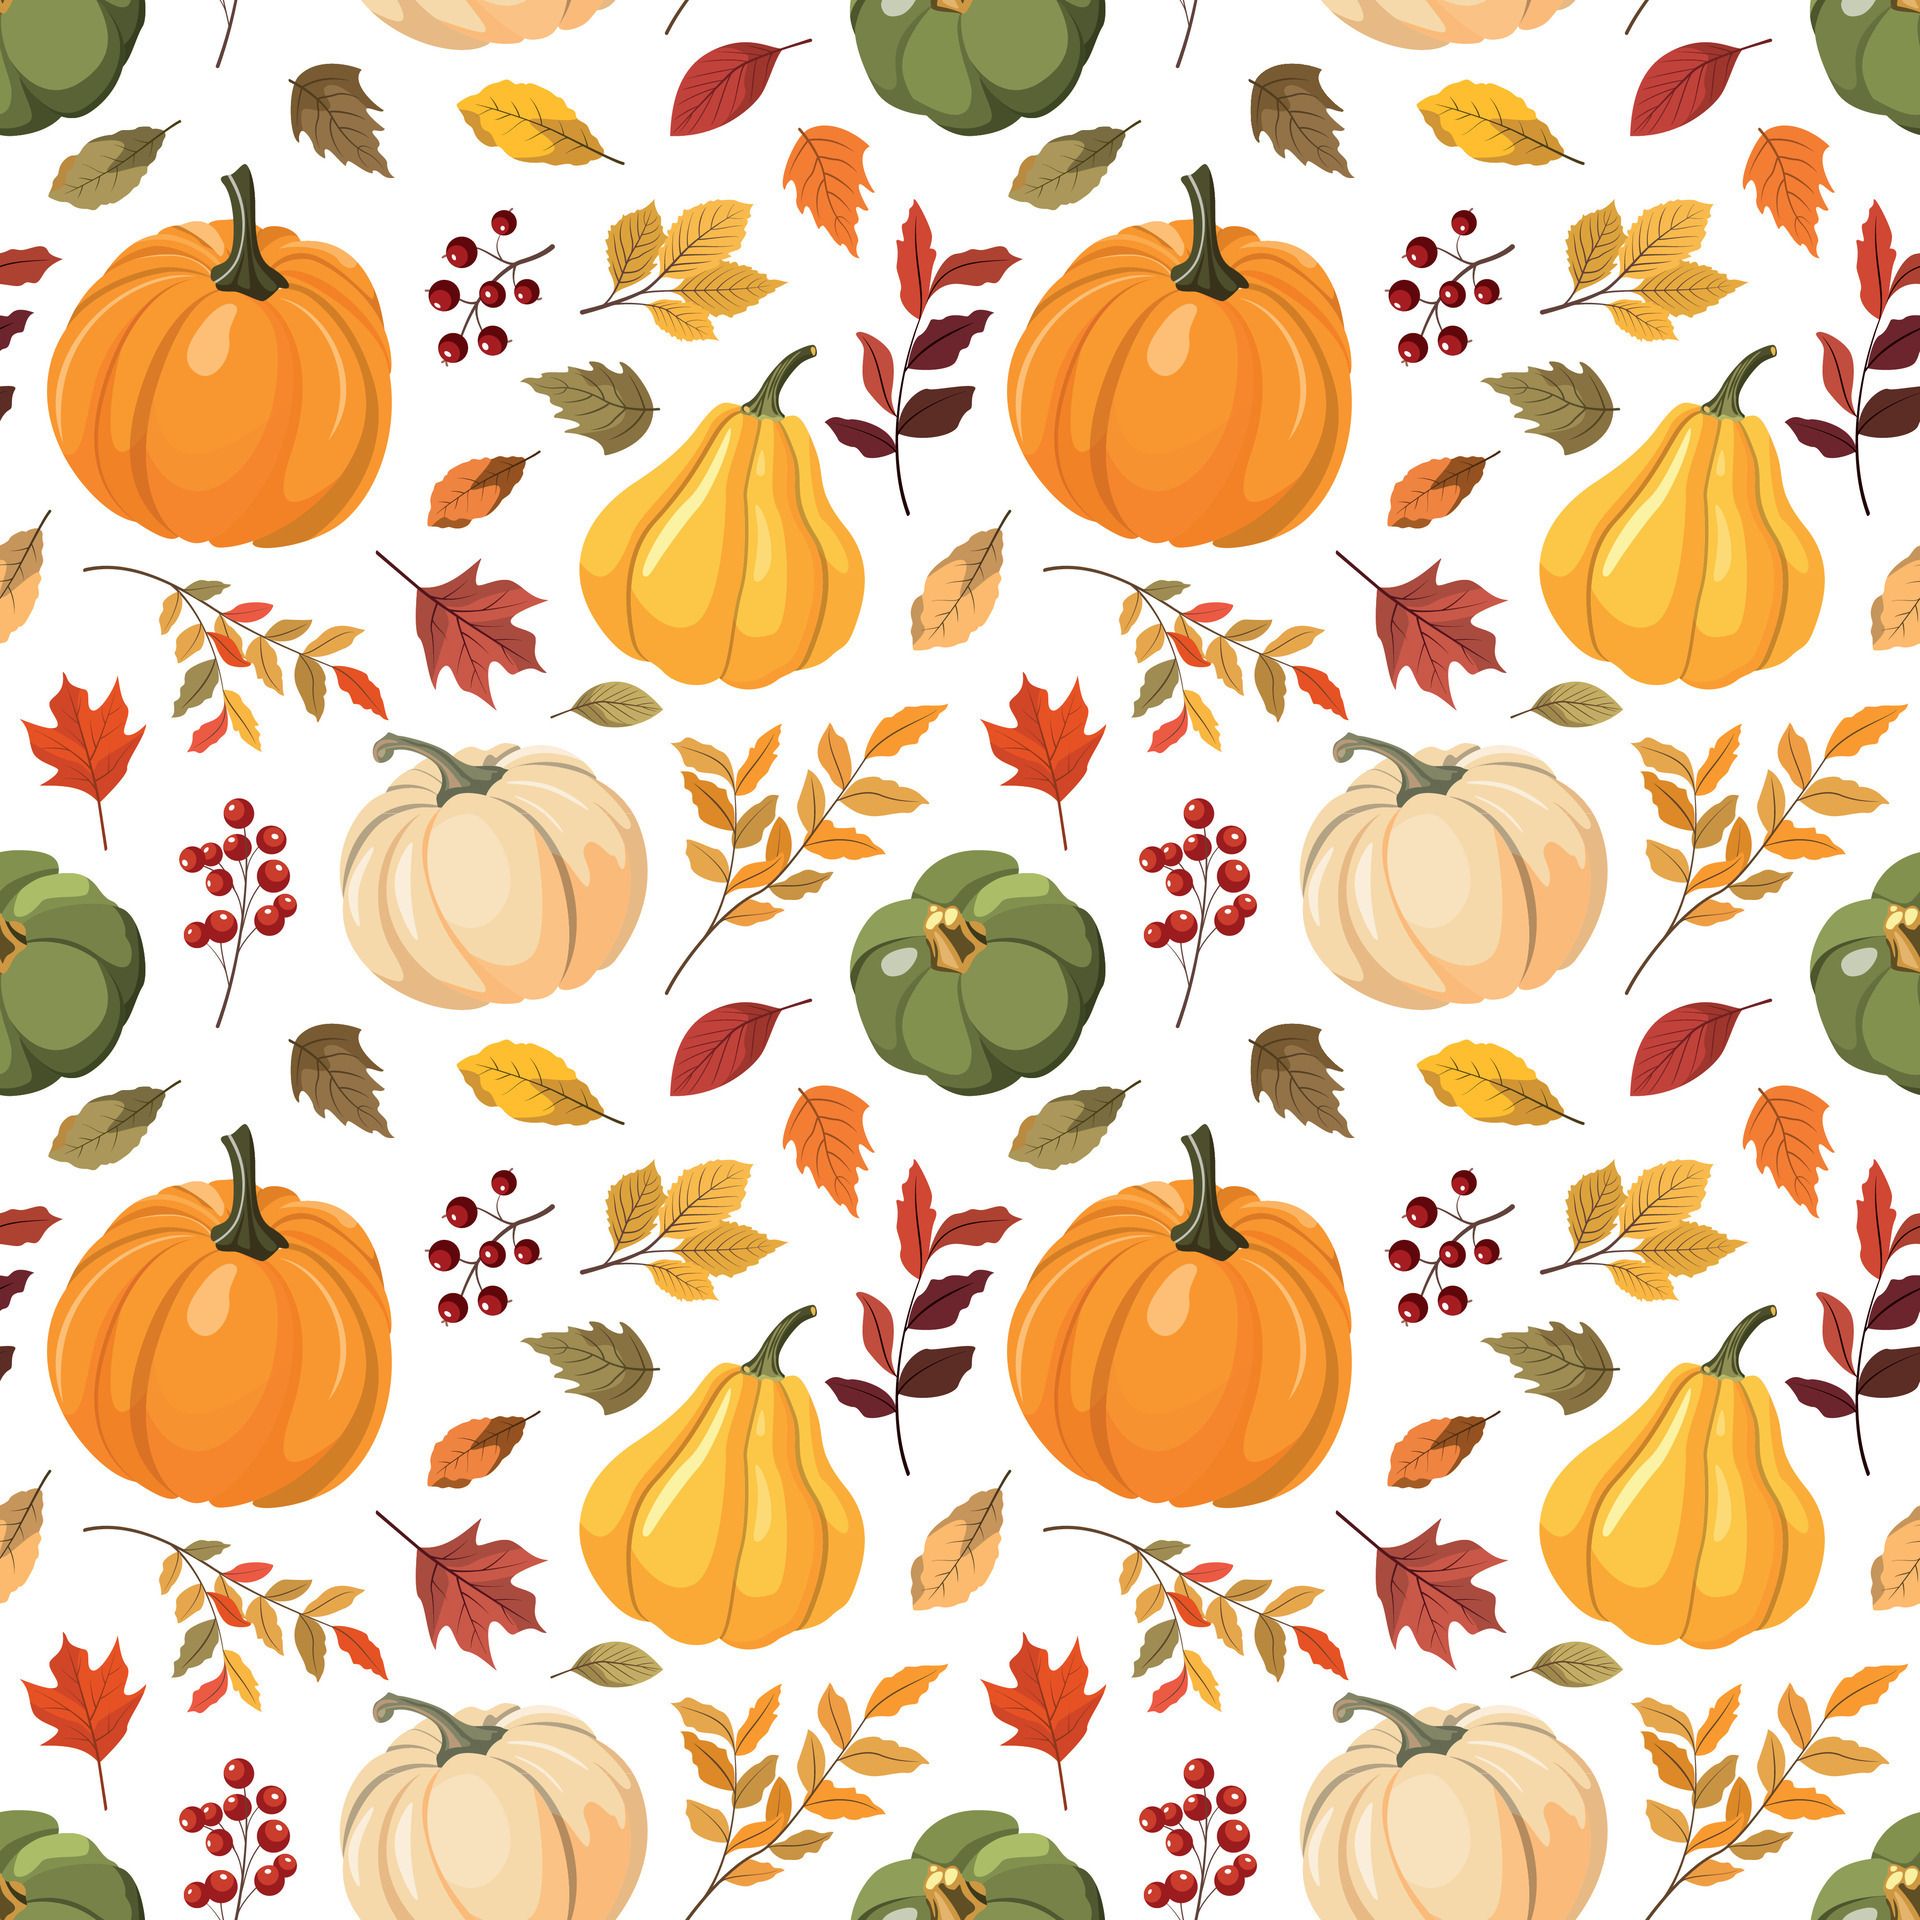 Autumn seamless pattern with colorful pumpkins, forest leaves and red berries. Vector illustration. Isolated on white background. Fall harvest, Thanksgiving wallpaper